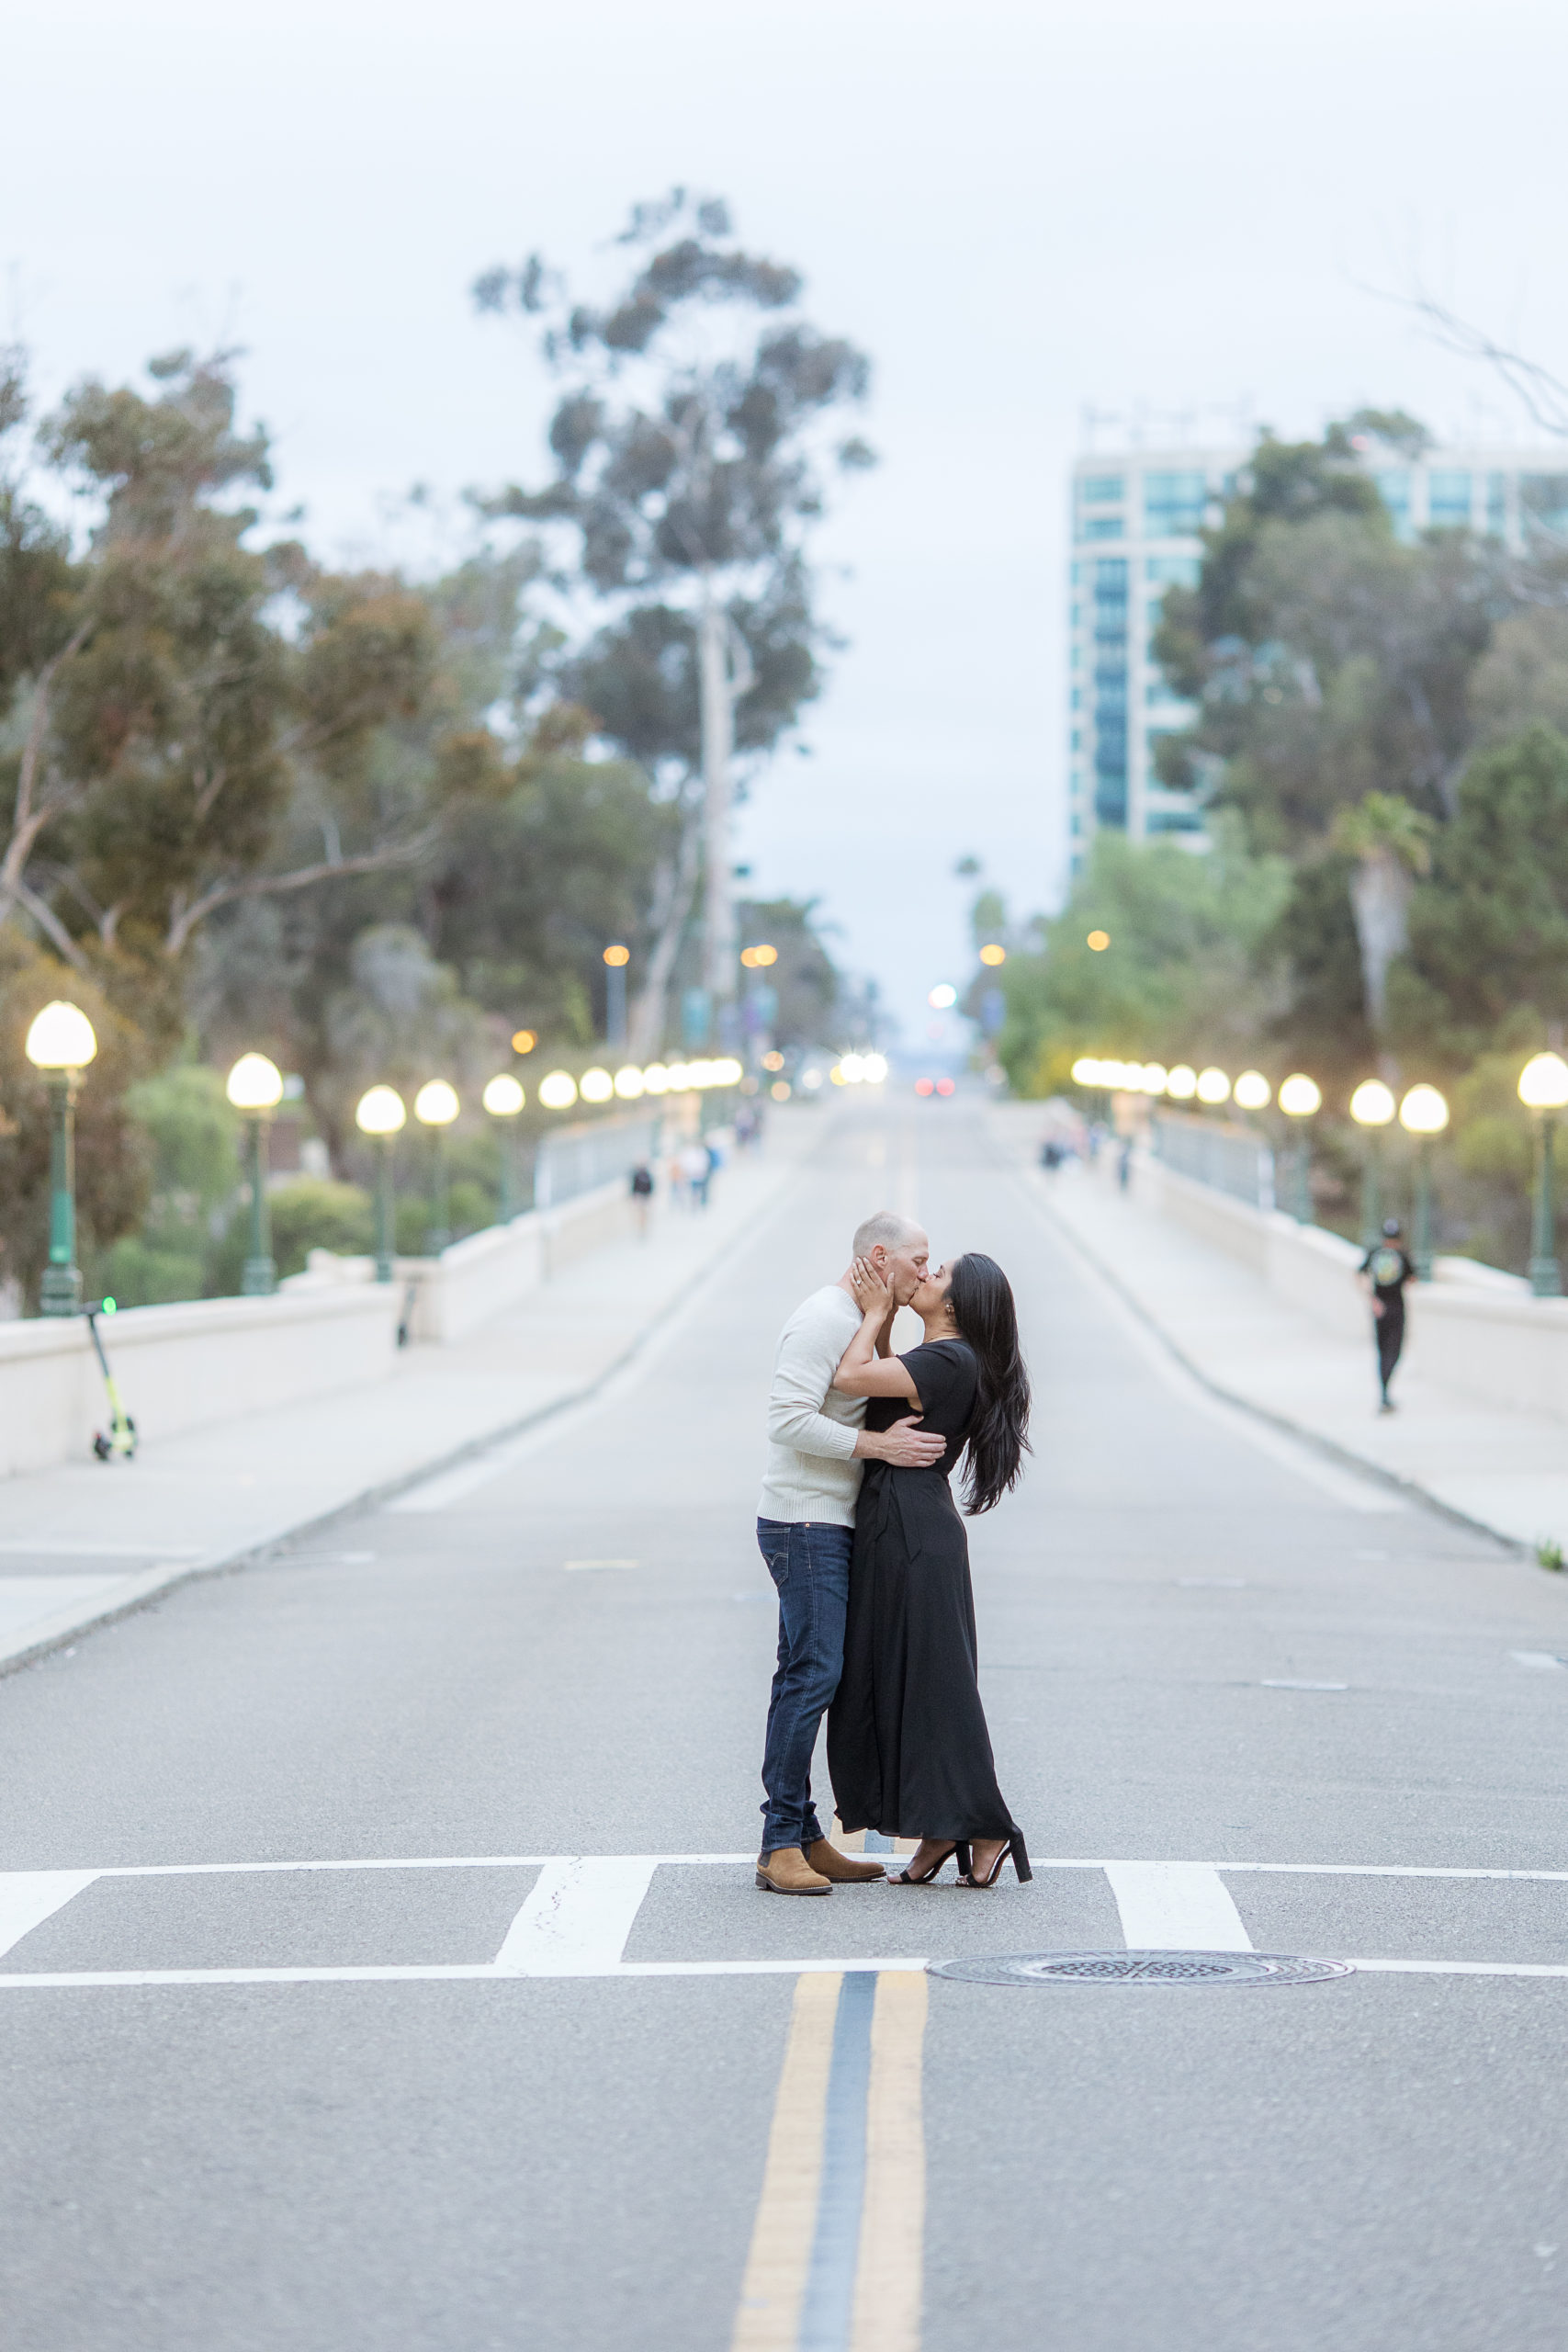 Danny & Kassy kiss in the street during their Balboa Park Engagement Session